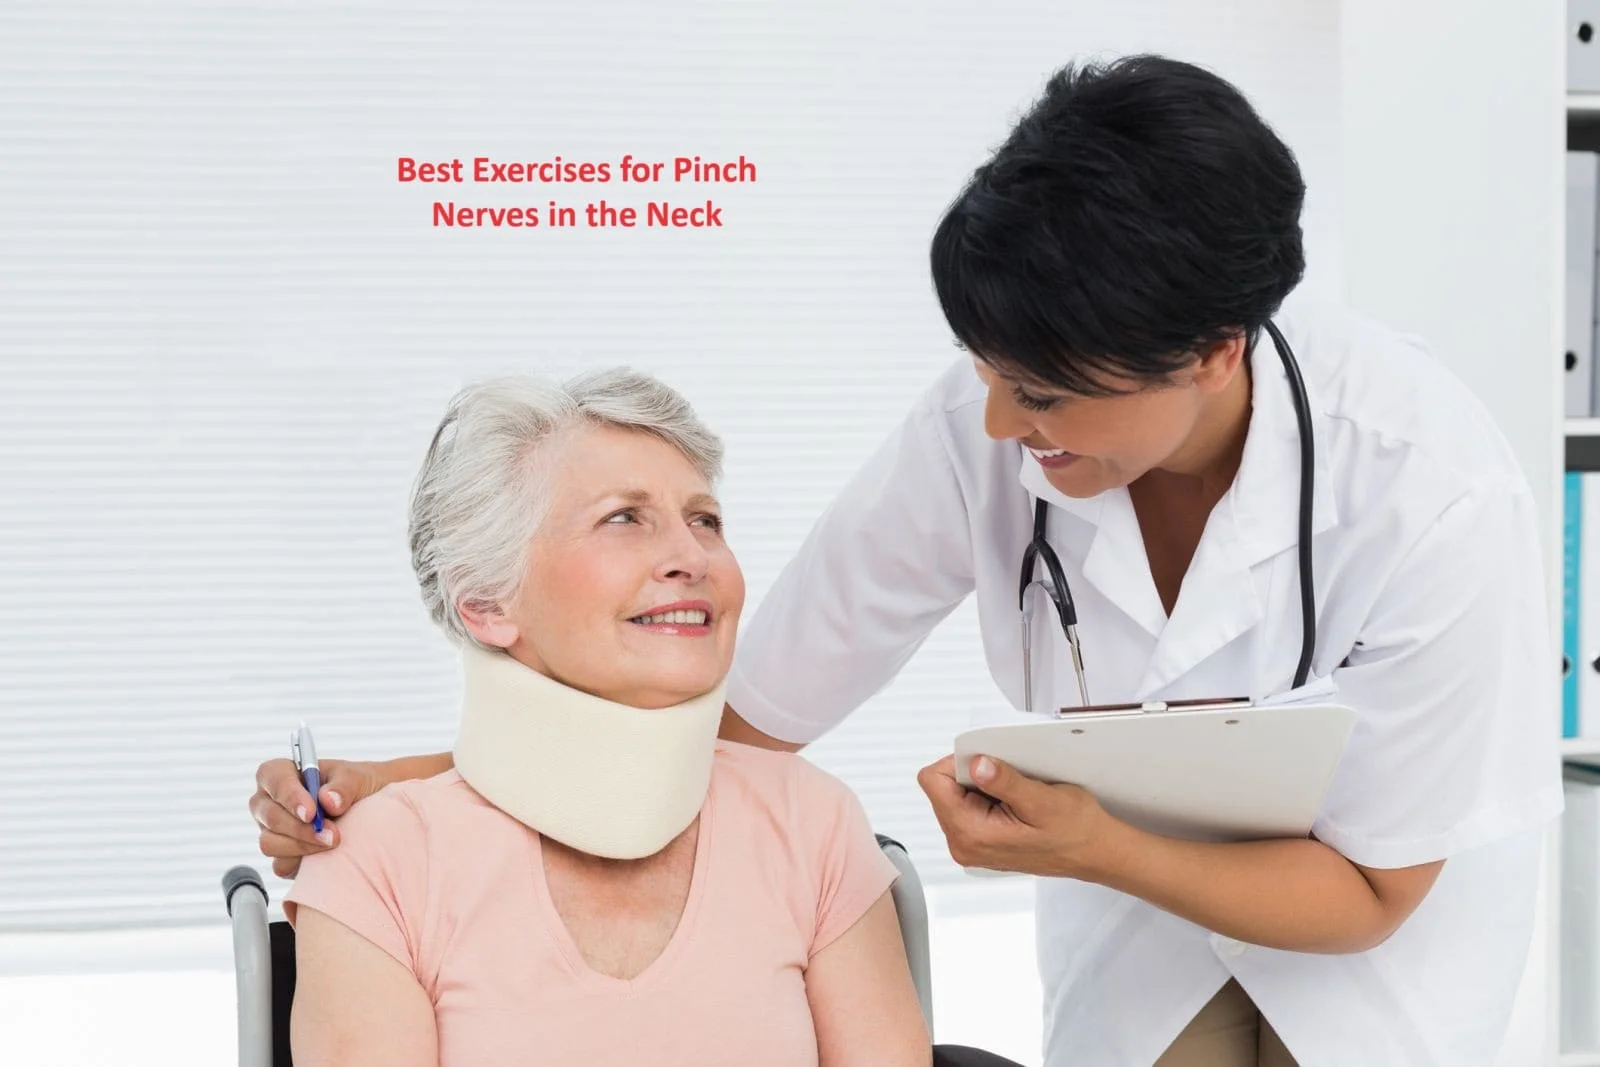 Best Exercises for Pinch Nerves in the Neck